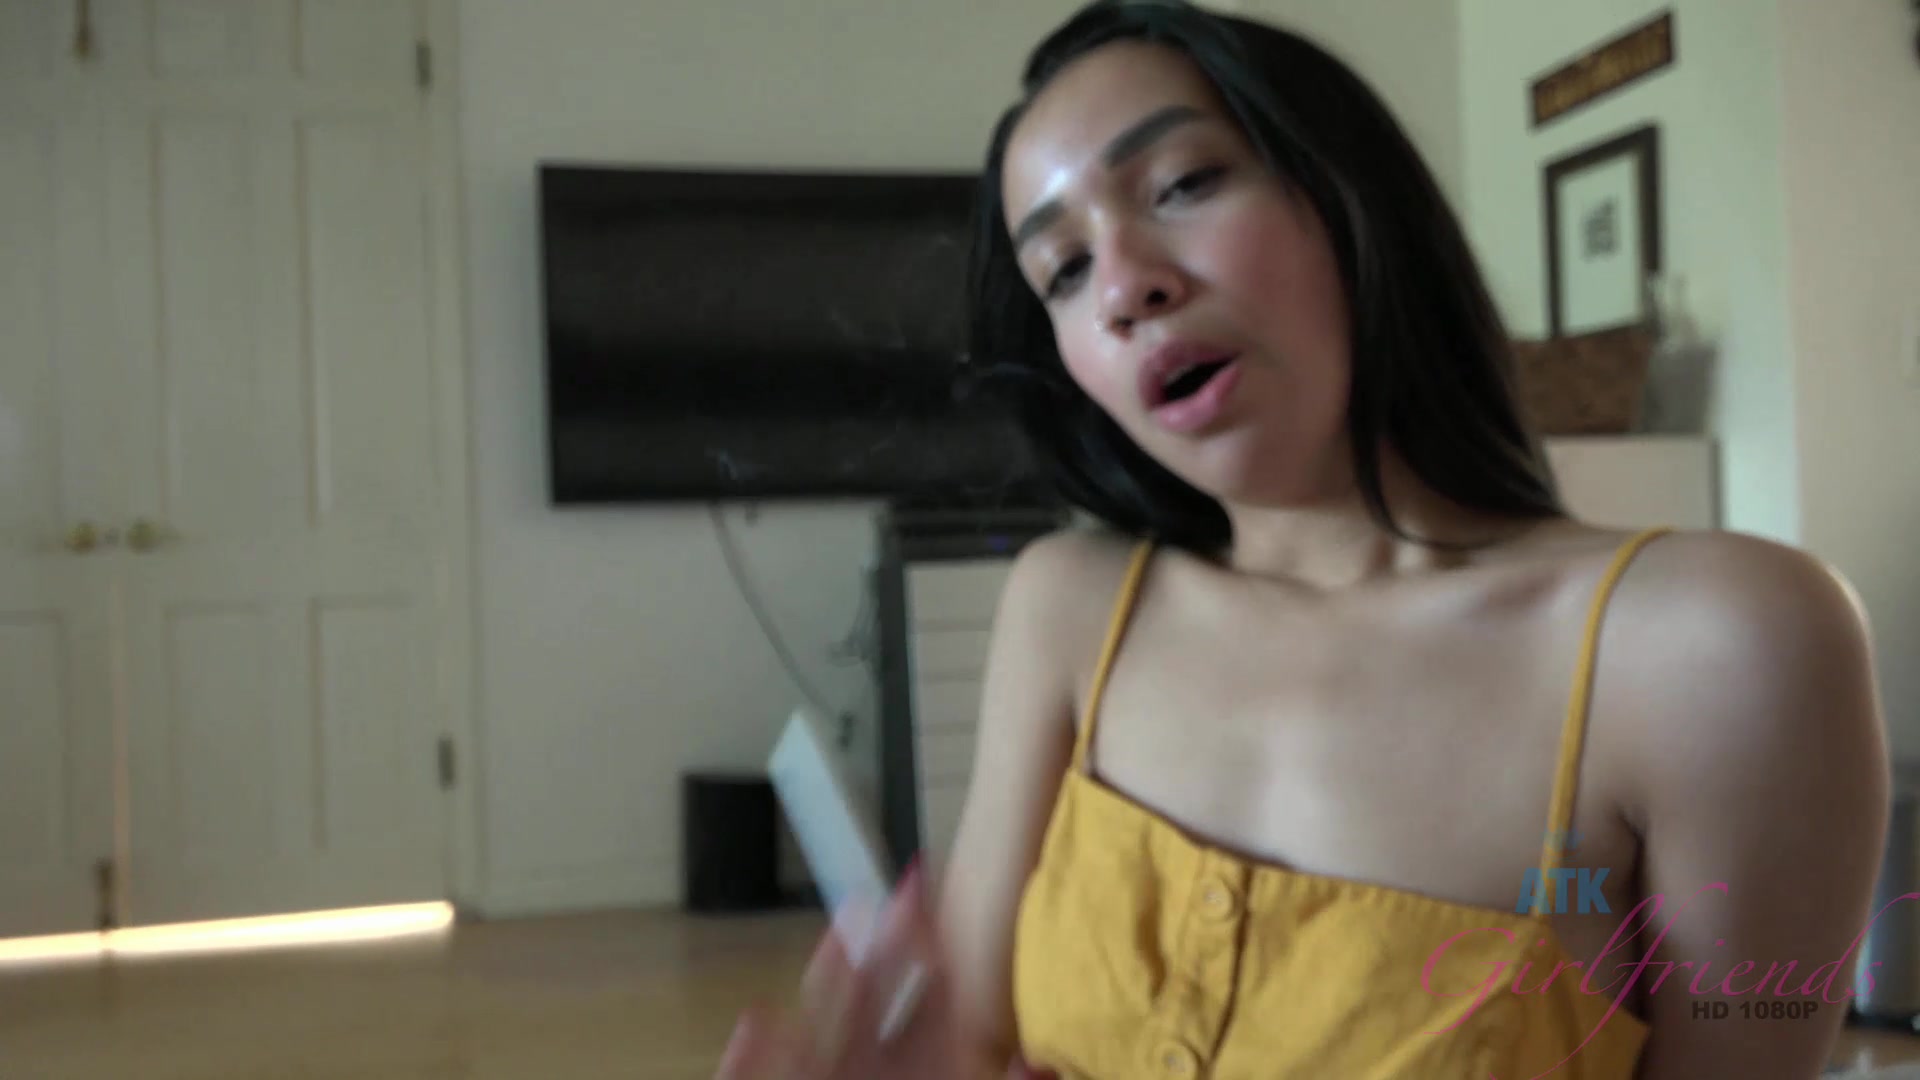 Jackie Rogen - You fuck Jackie again, and she jerks your cock to cum